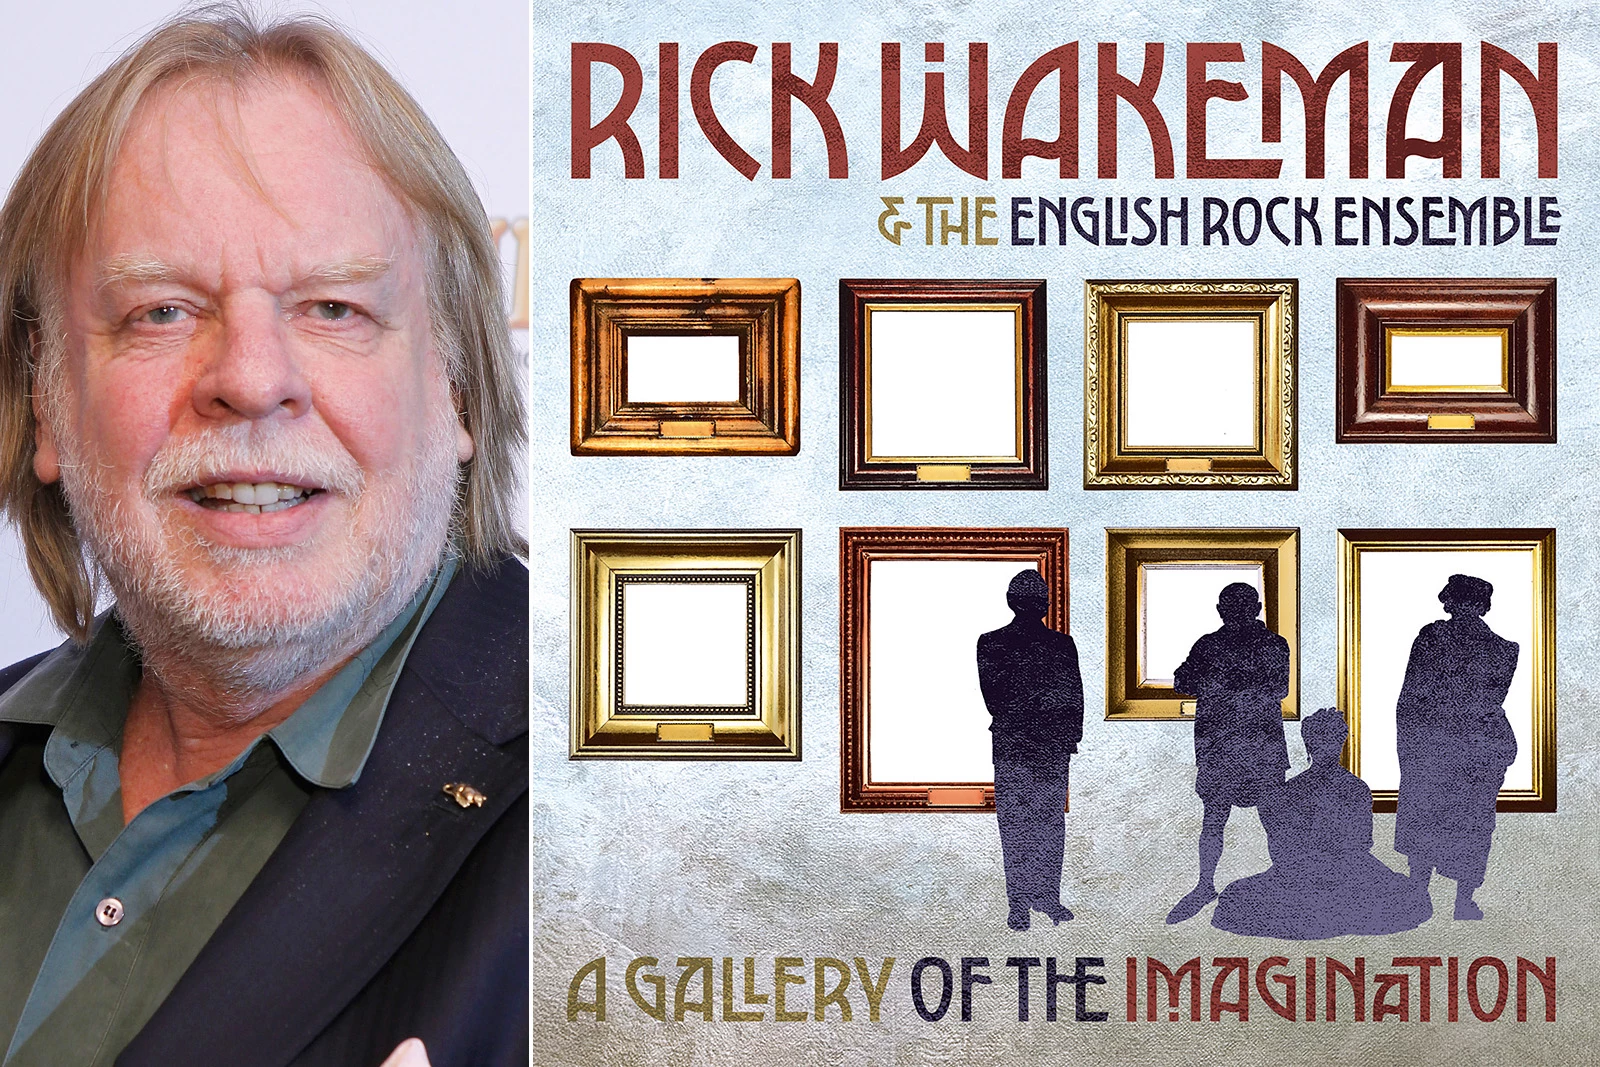 Rick Wakeman Reveals New Album 'A Gallery of the Imagination'